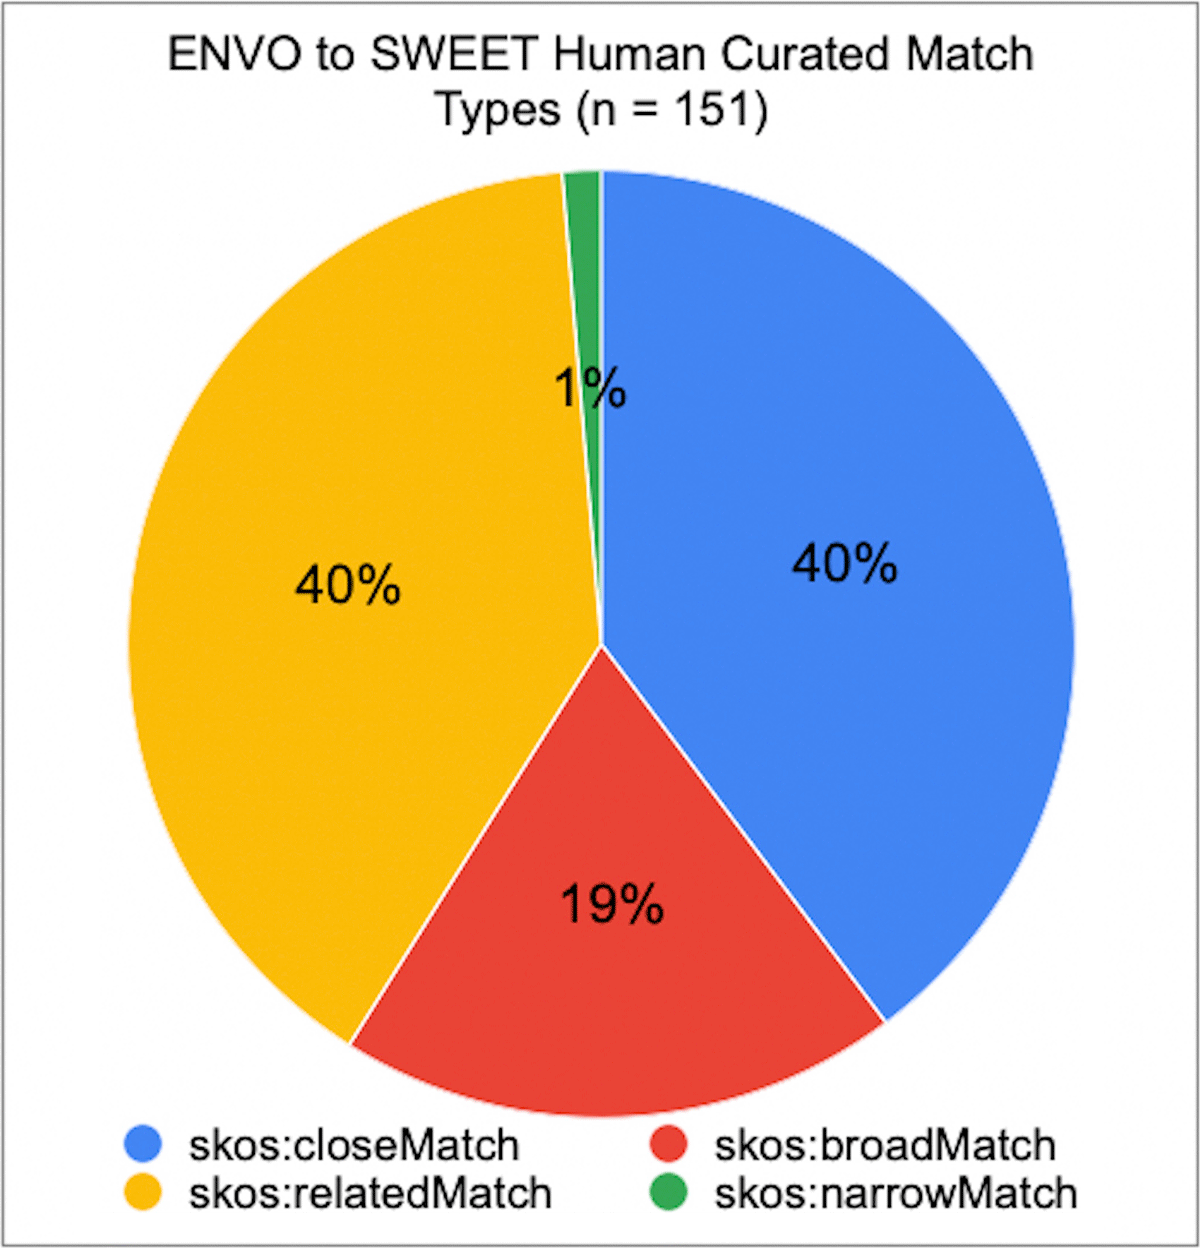 ENVO to SWEET term match types - 40% close; 40% related; 19% broad; 1% narrow